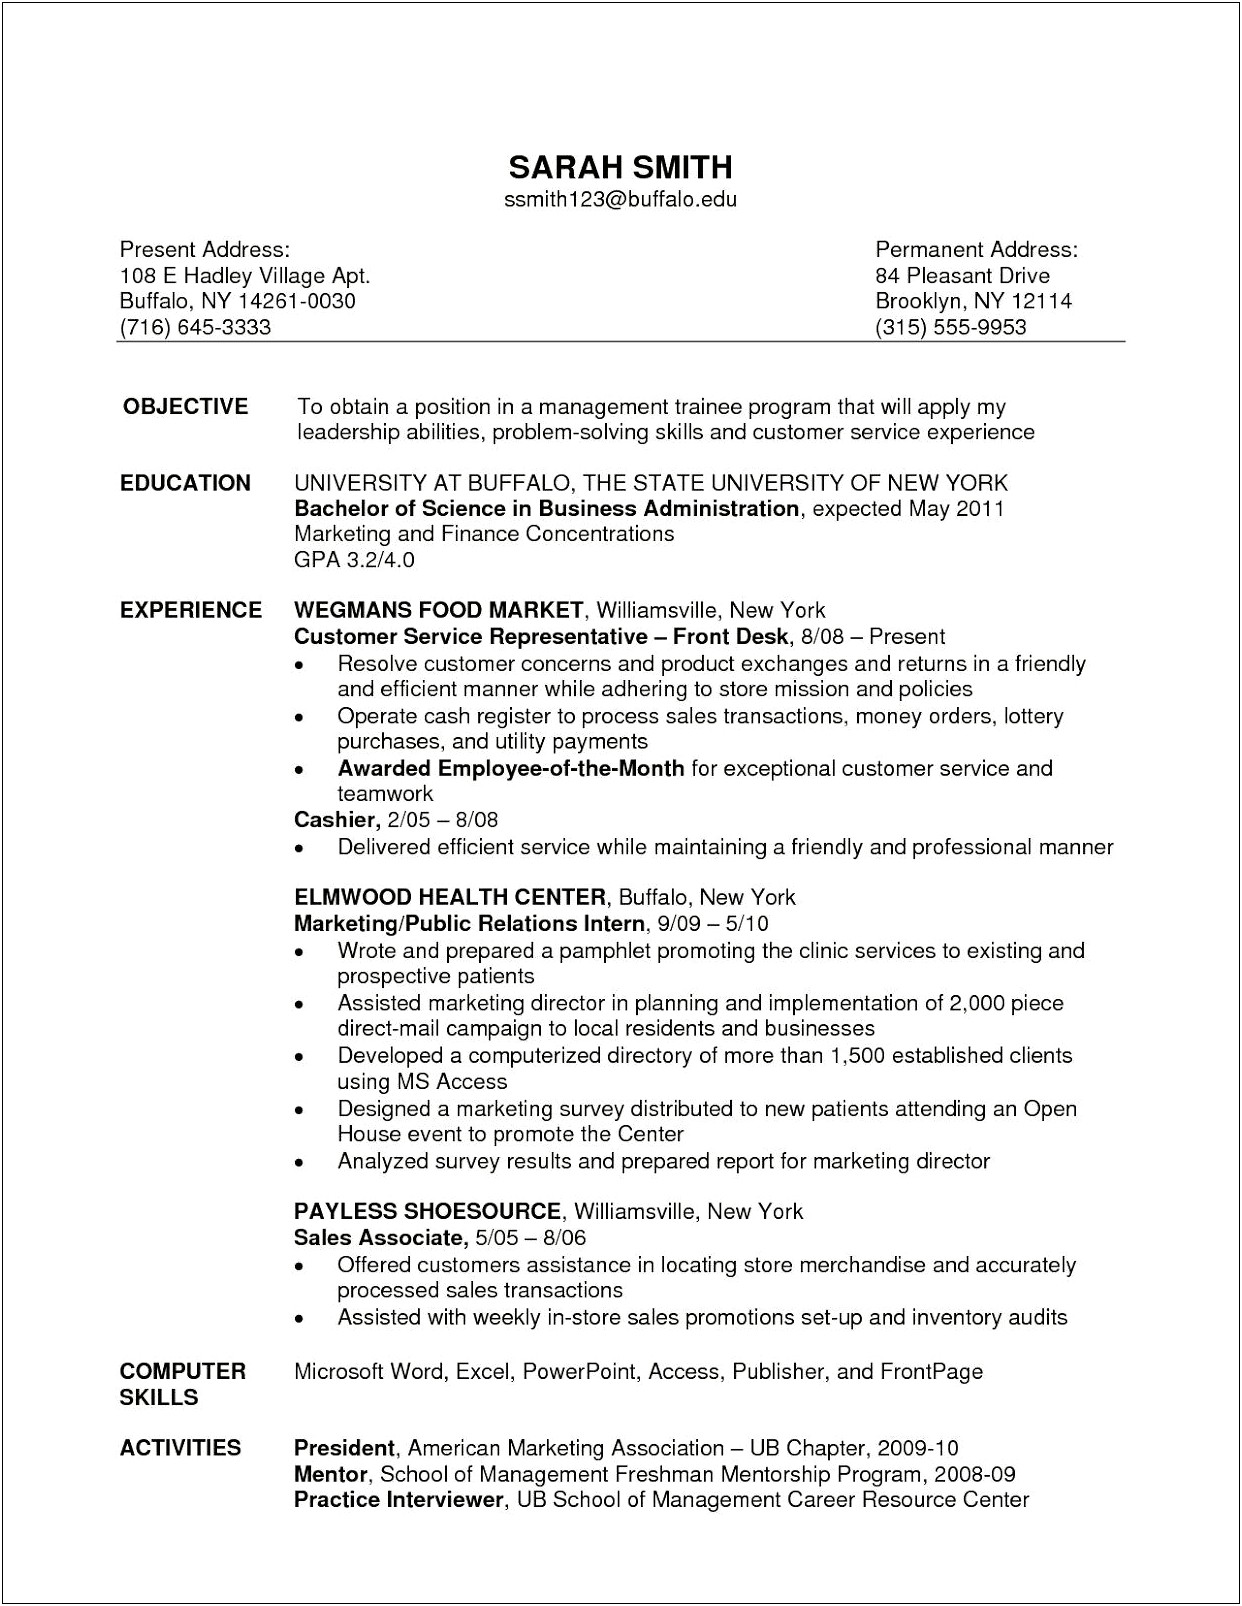 Resume Objective Examples Retail Manager